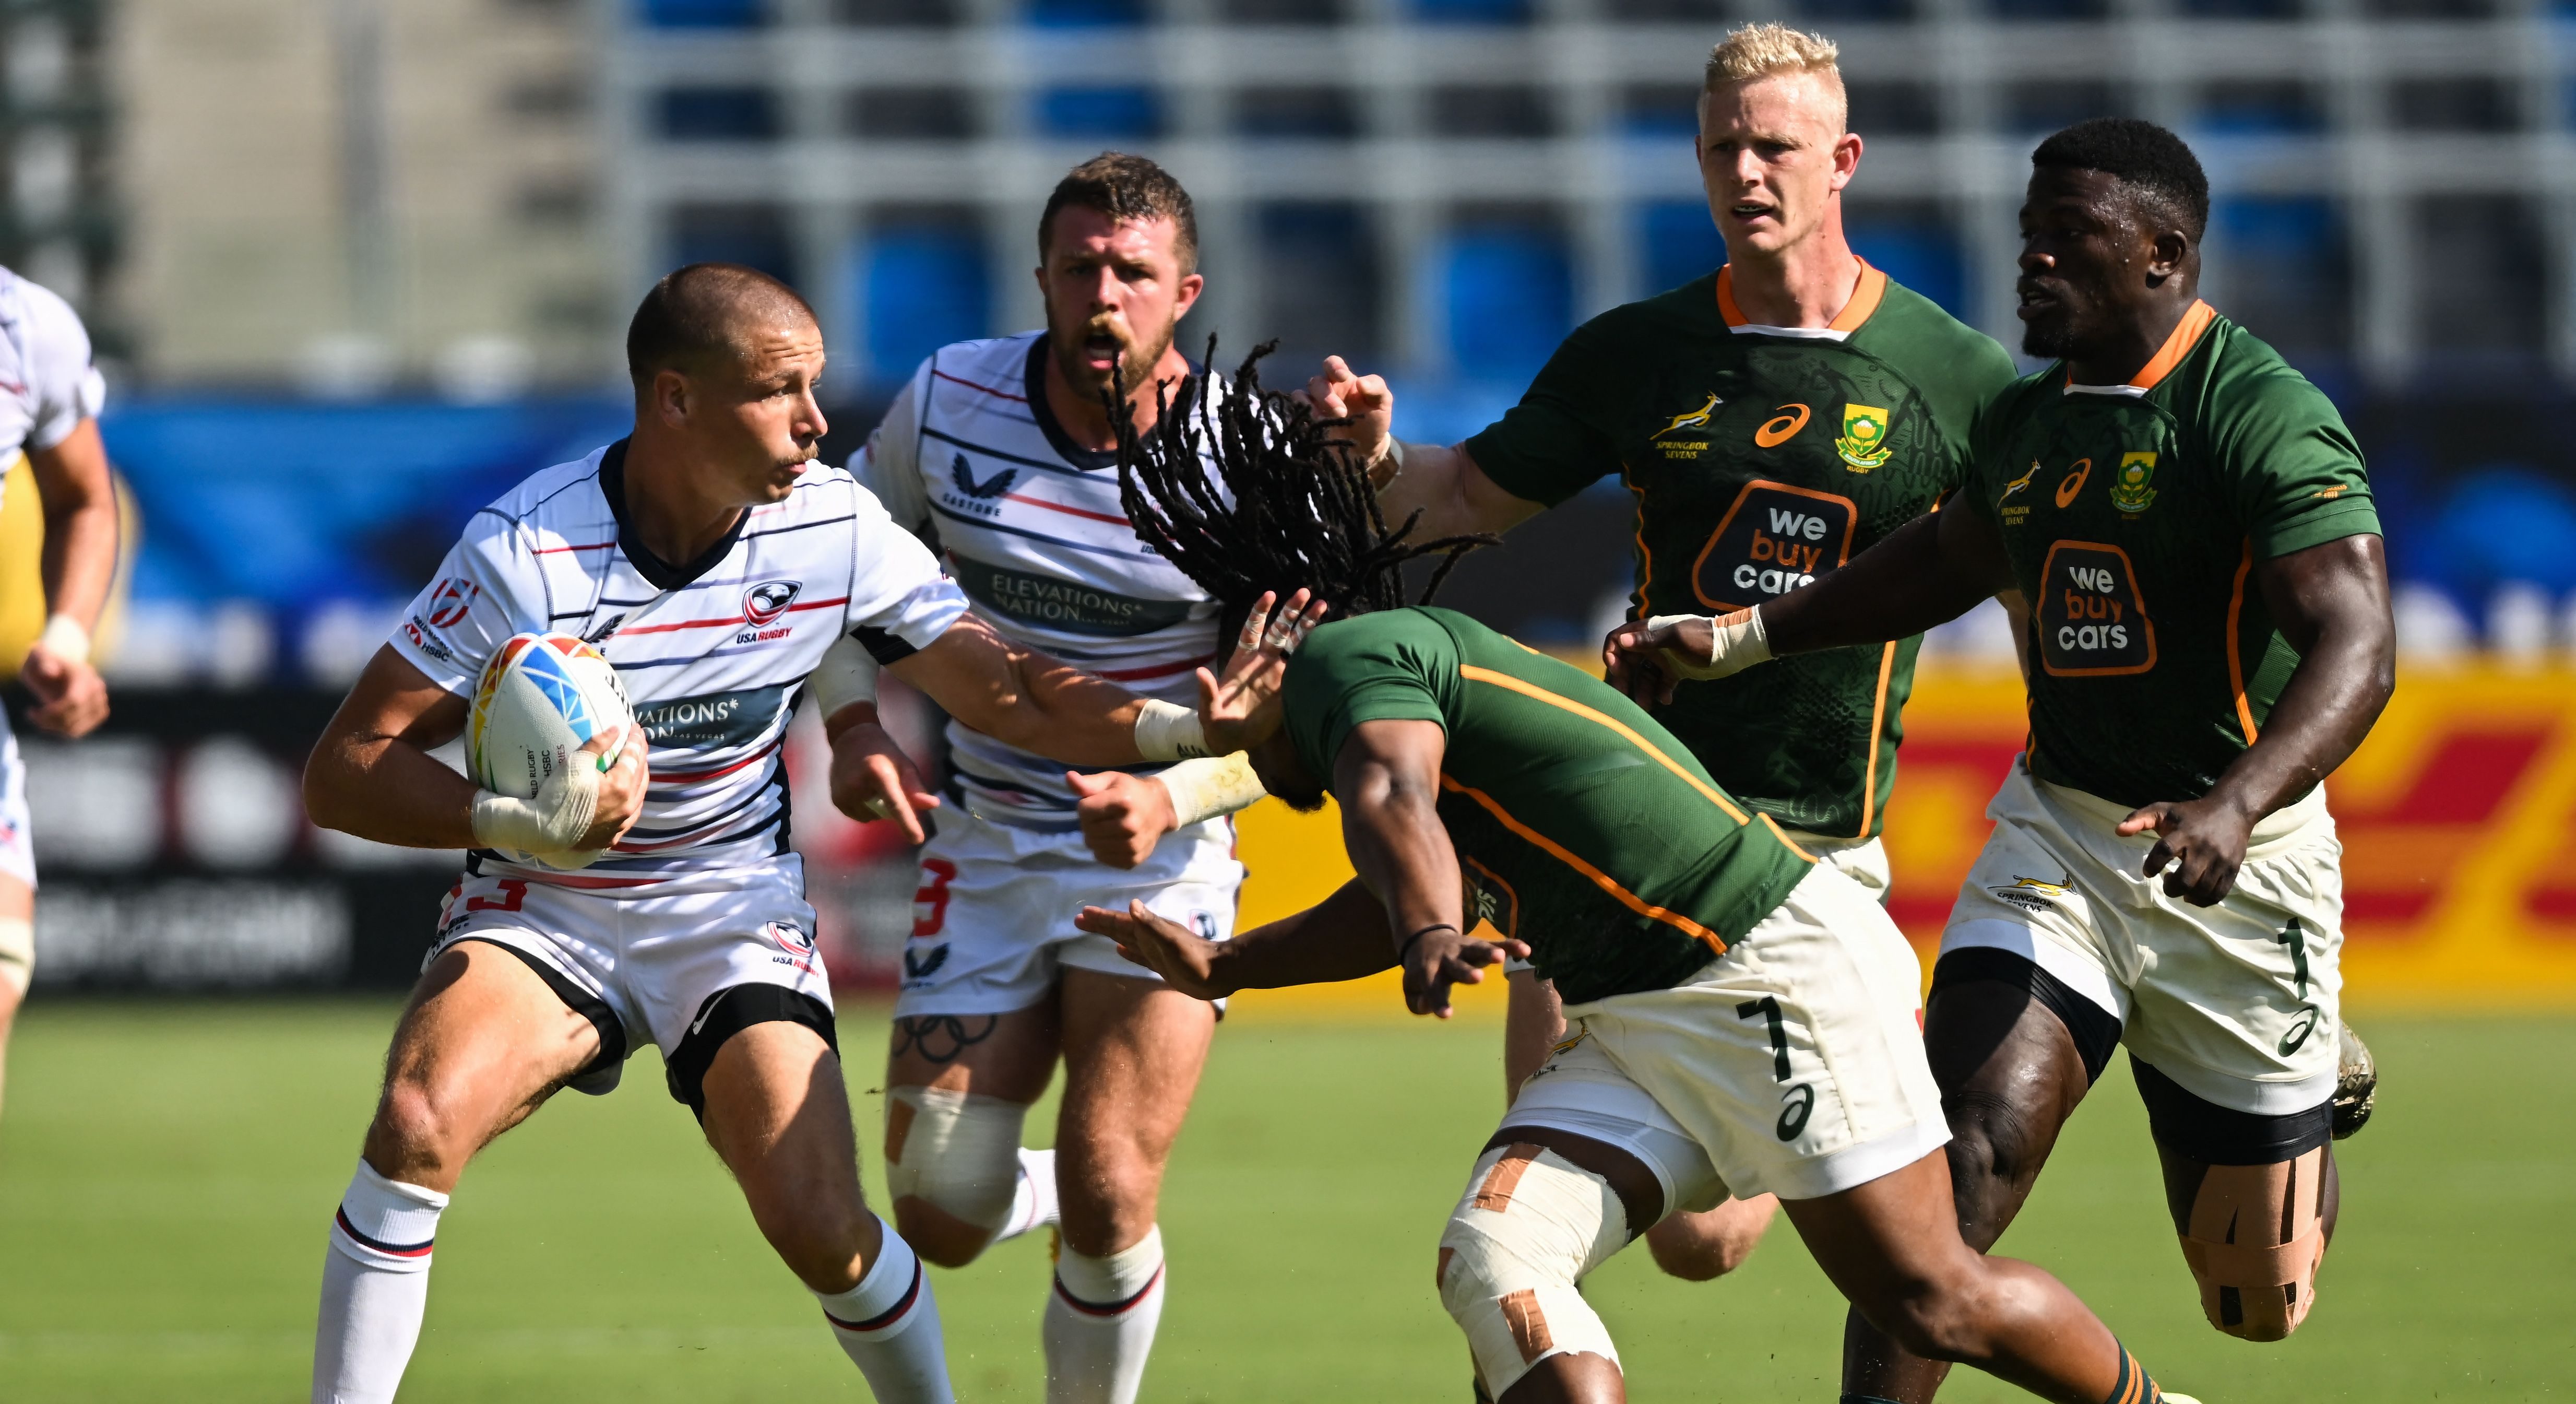 stream rugby south africa